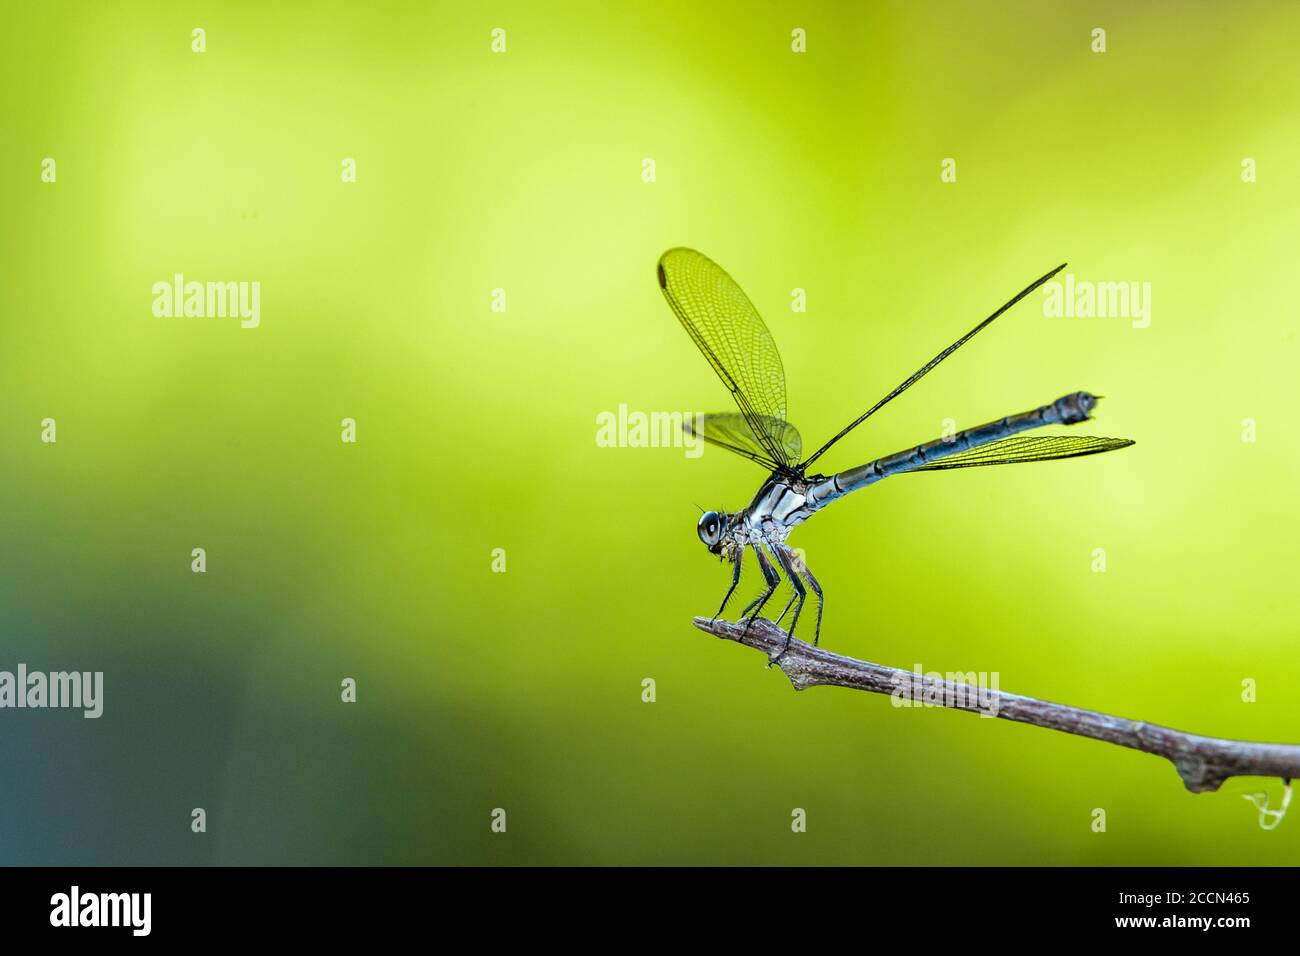 A close-up, side-on of a blue dragonfly, between hunting forays, resting on a twig with an out of focus green background in Cairns, Australia. Stock Photo